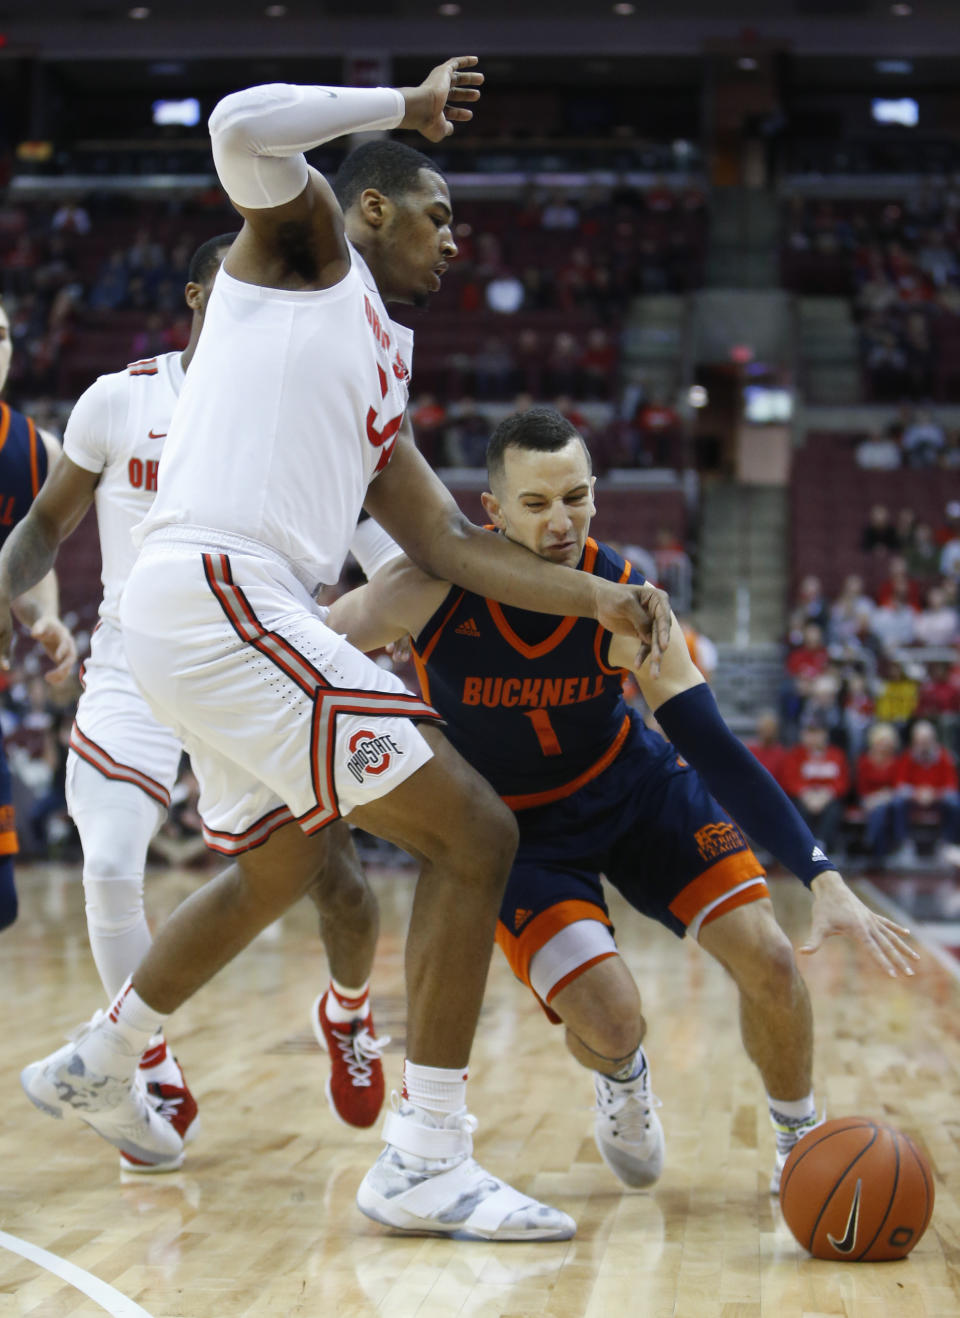 Bucknell's Kimbal Mackenzie, right, drives to the basket against Ohio State's Kaleb Wesson during the first half of an NCAA college basketball game Saturday, Dec. 15, 2018, in Columbus, Ohio. (AP Photo/Jay LaPrete)